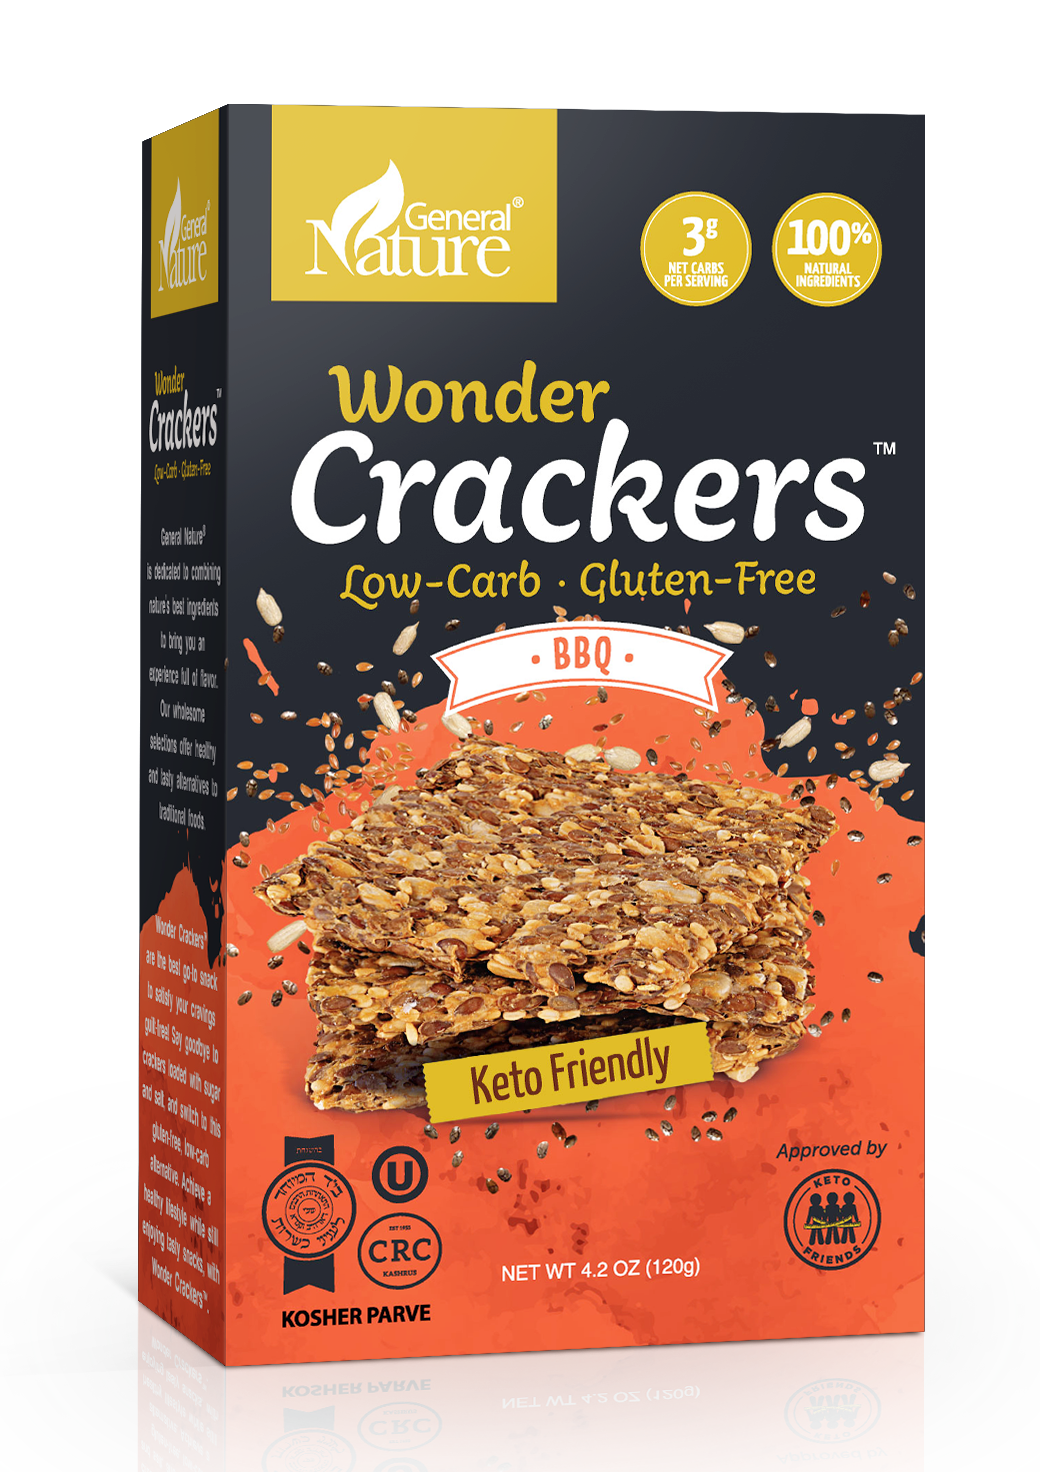 General Nature Low-Carb, Gluten-Free Wonder Crackers, BBQ, 4.2oz - Multi-Pack